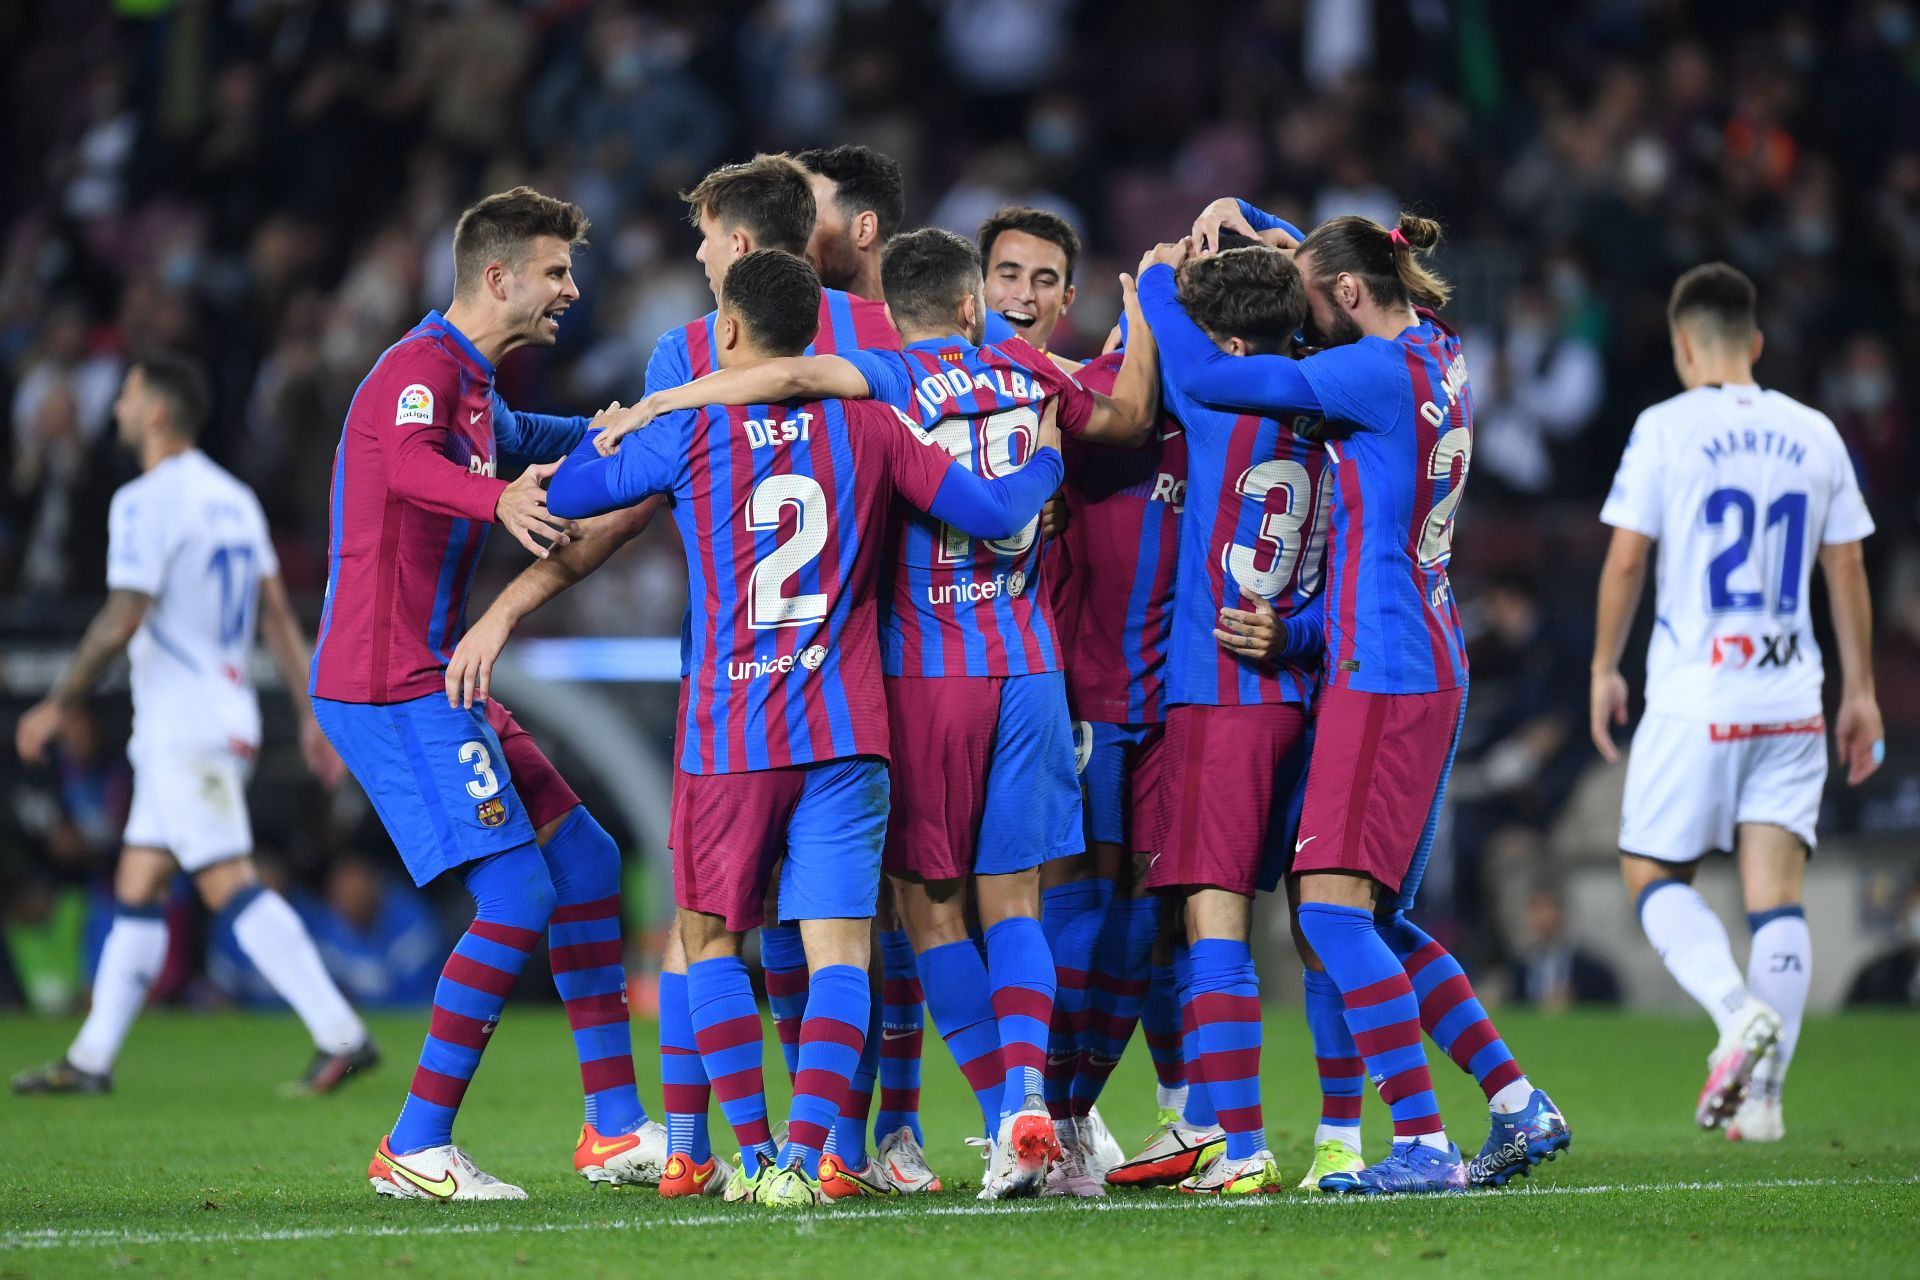 Barcelona have scored over 100 goals in a calendar year on multiple occasions.